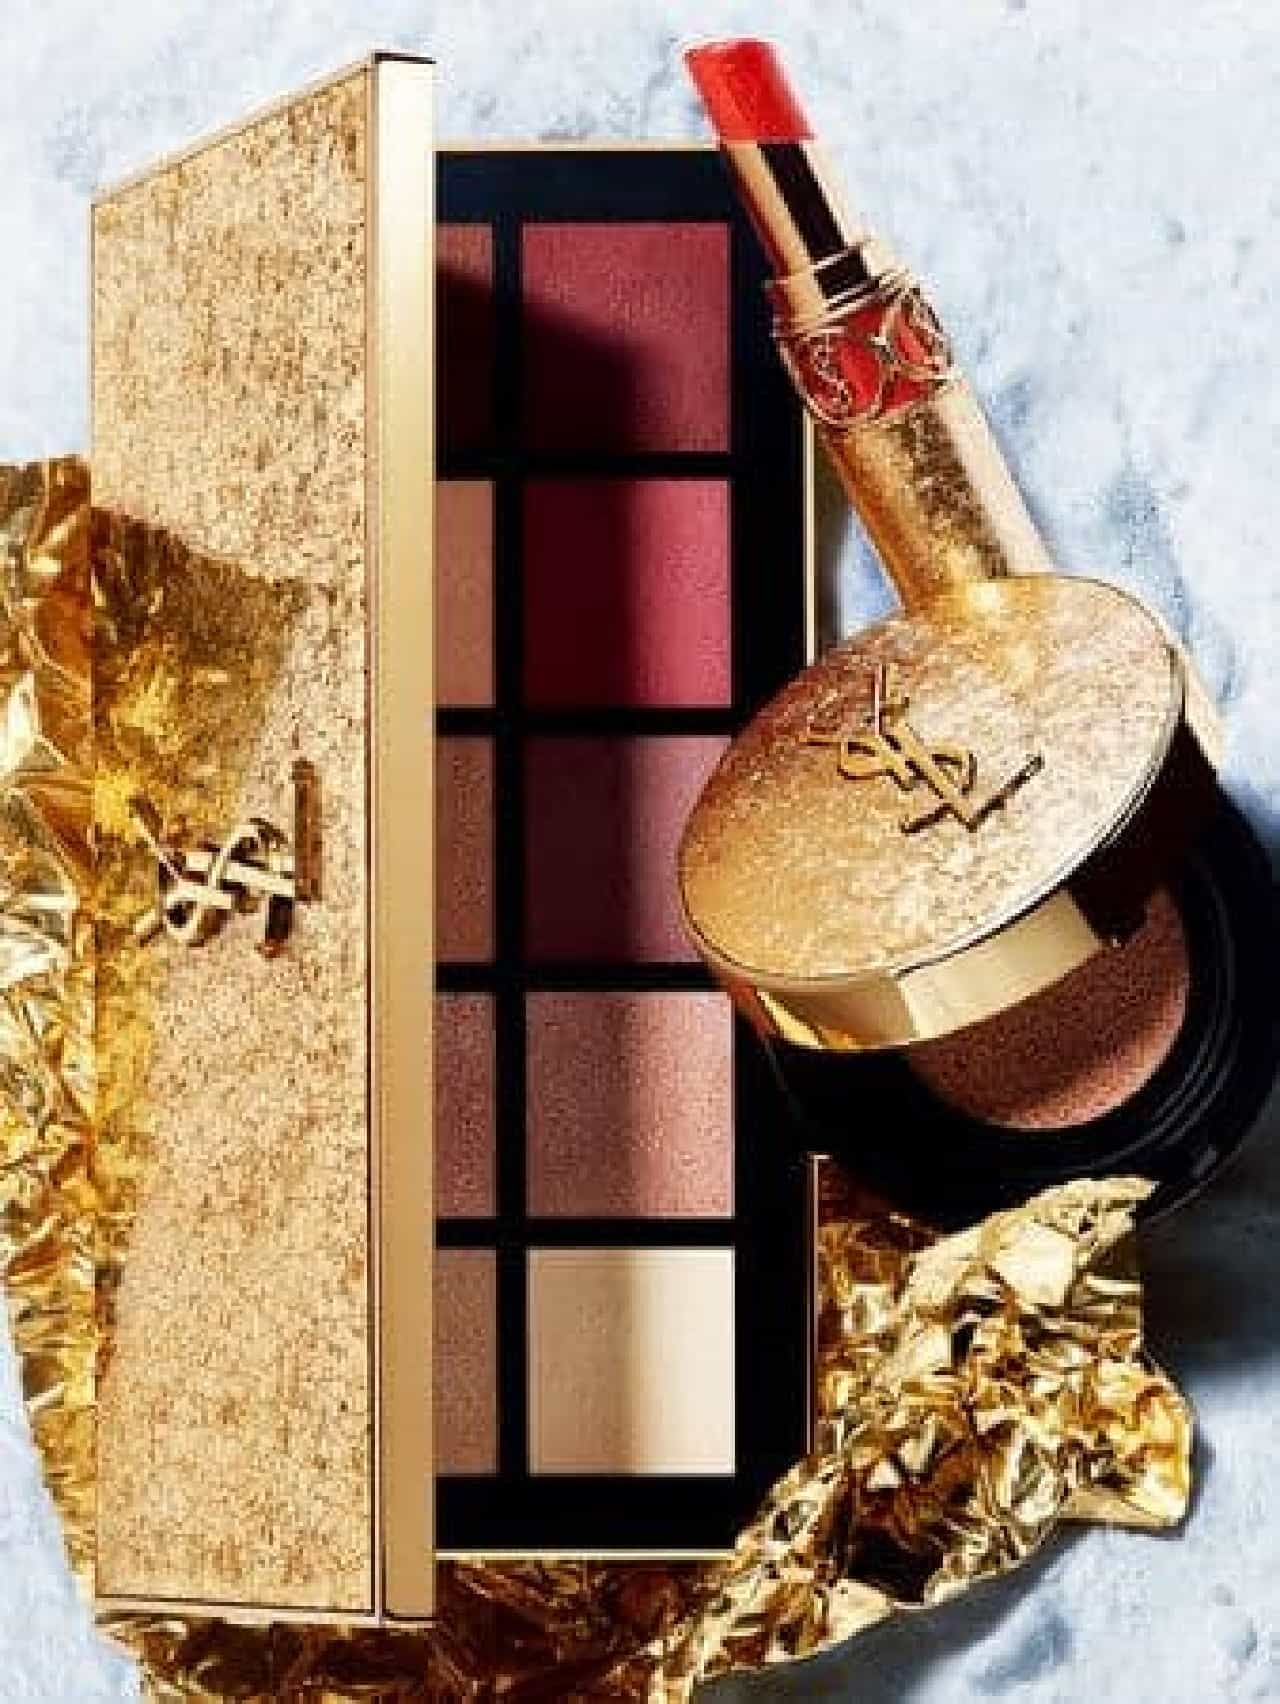 YSL's 2021 Limited Edition Noël Look "Gold Atelier Night Paris"